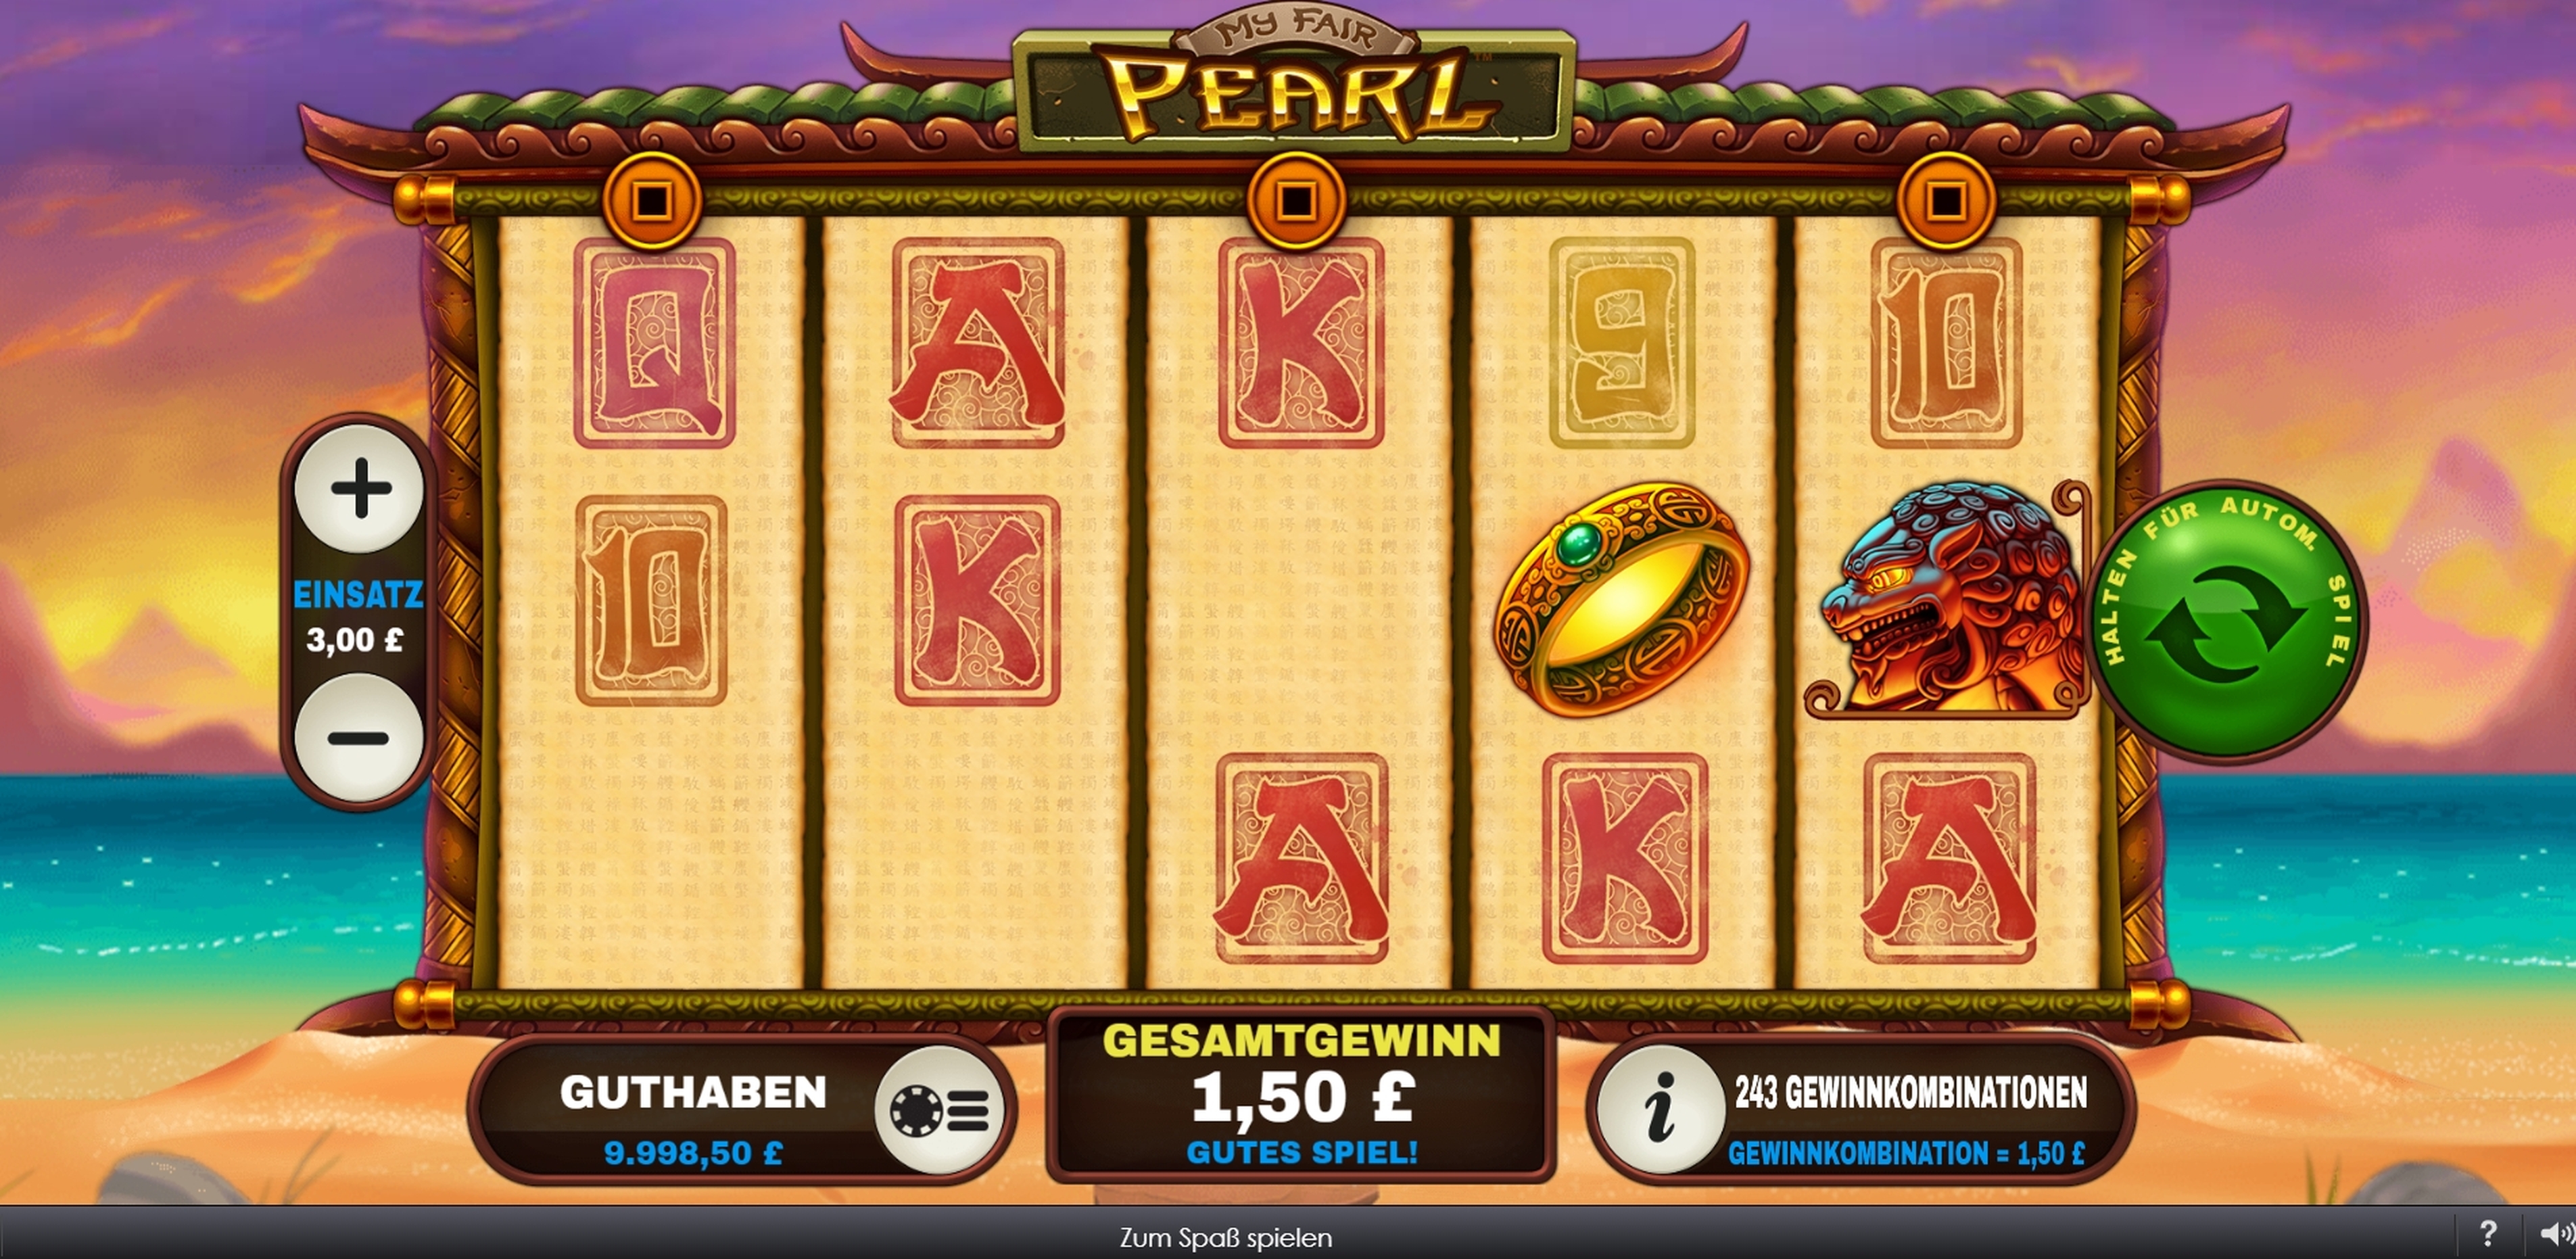 Win Money in My Fair Pearl Free Slot Game by GECO Gaming